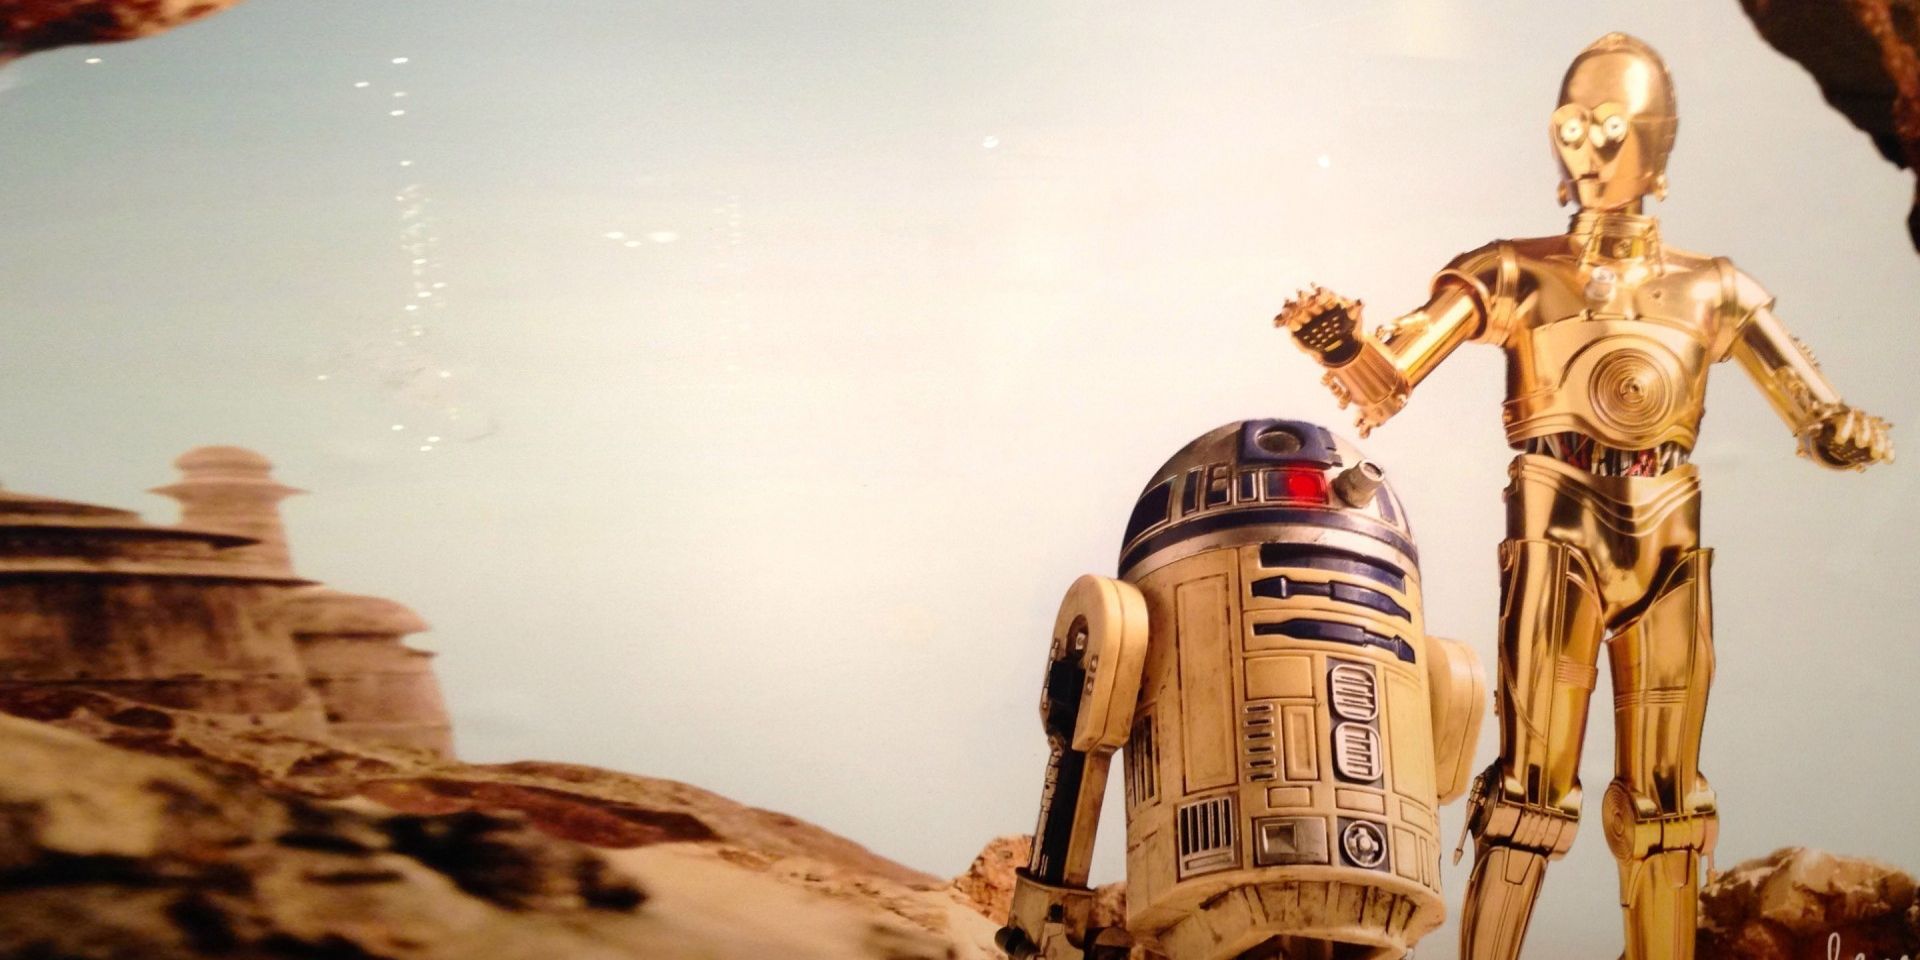 R2D2 and C3PO in Star Wars A New Hope